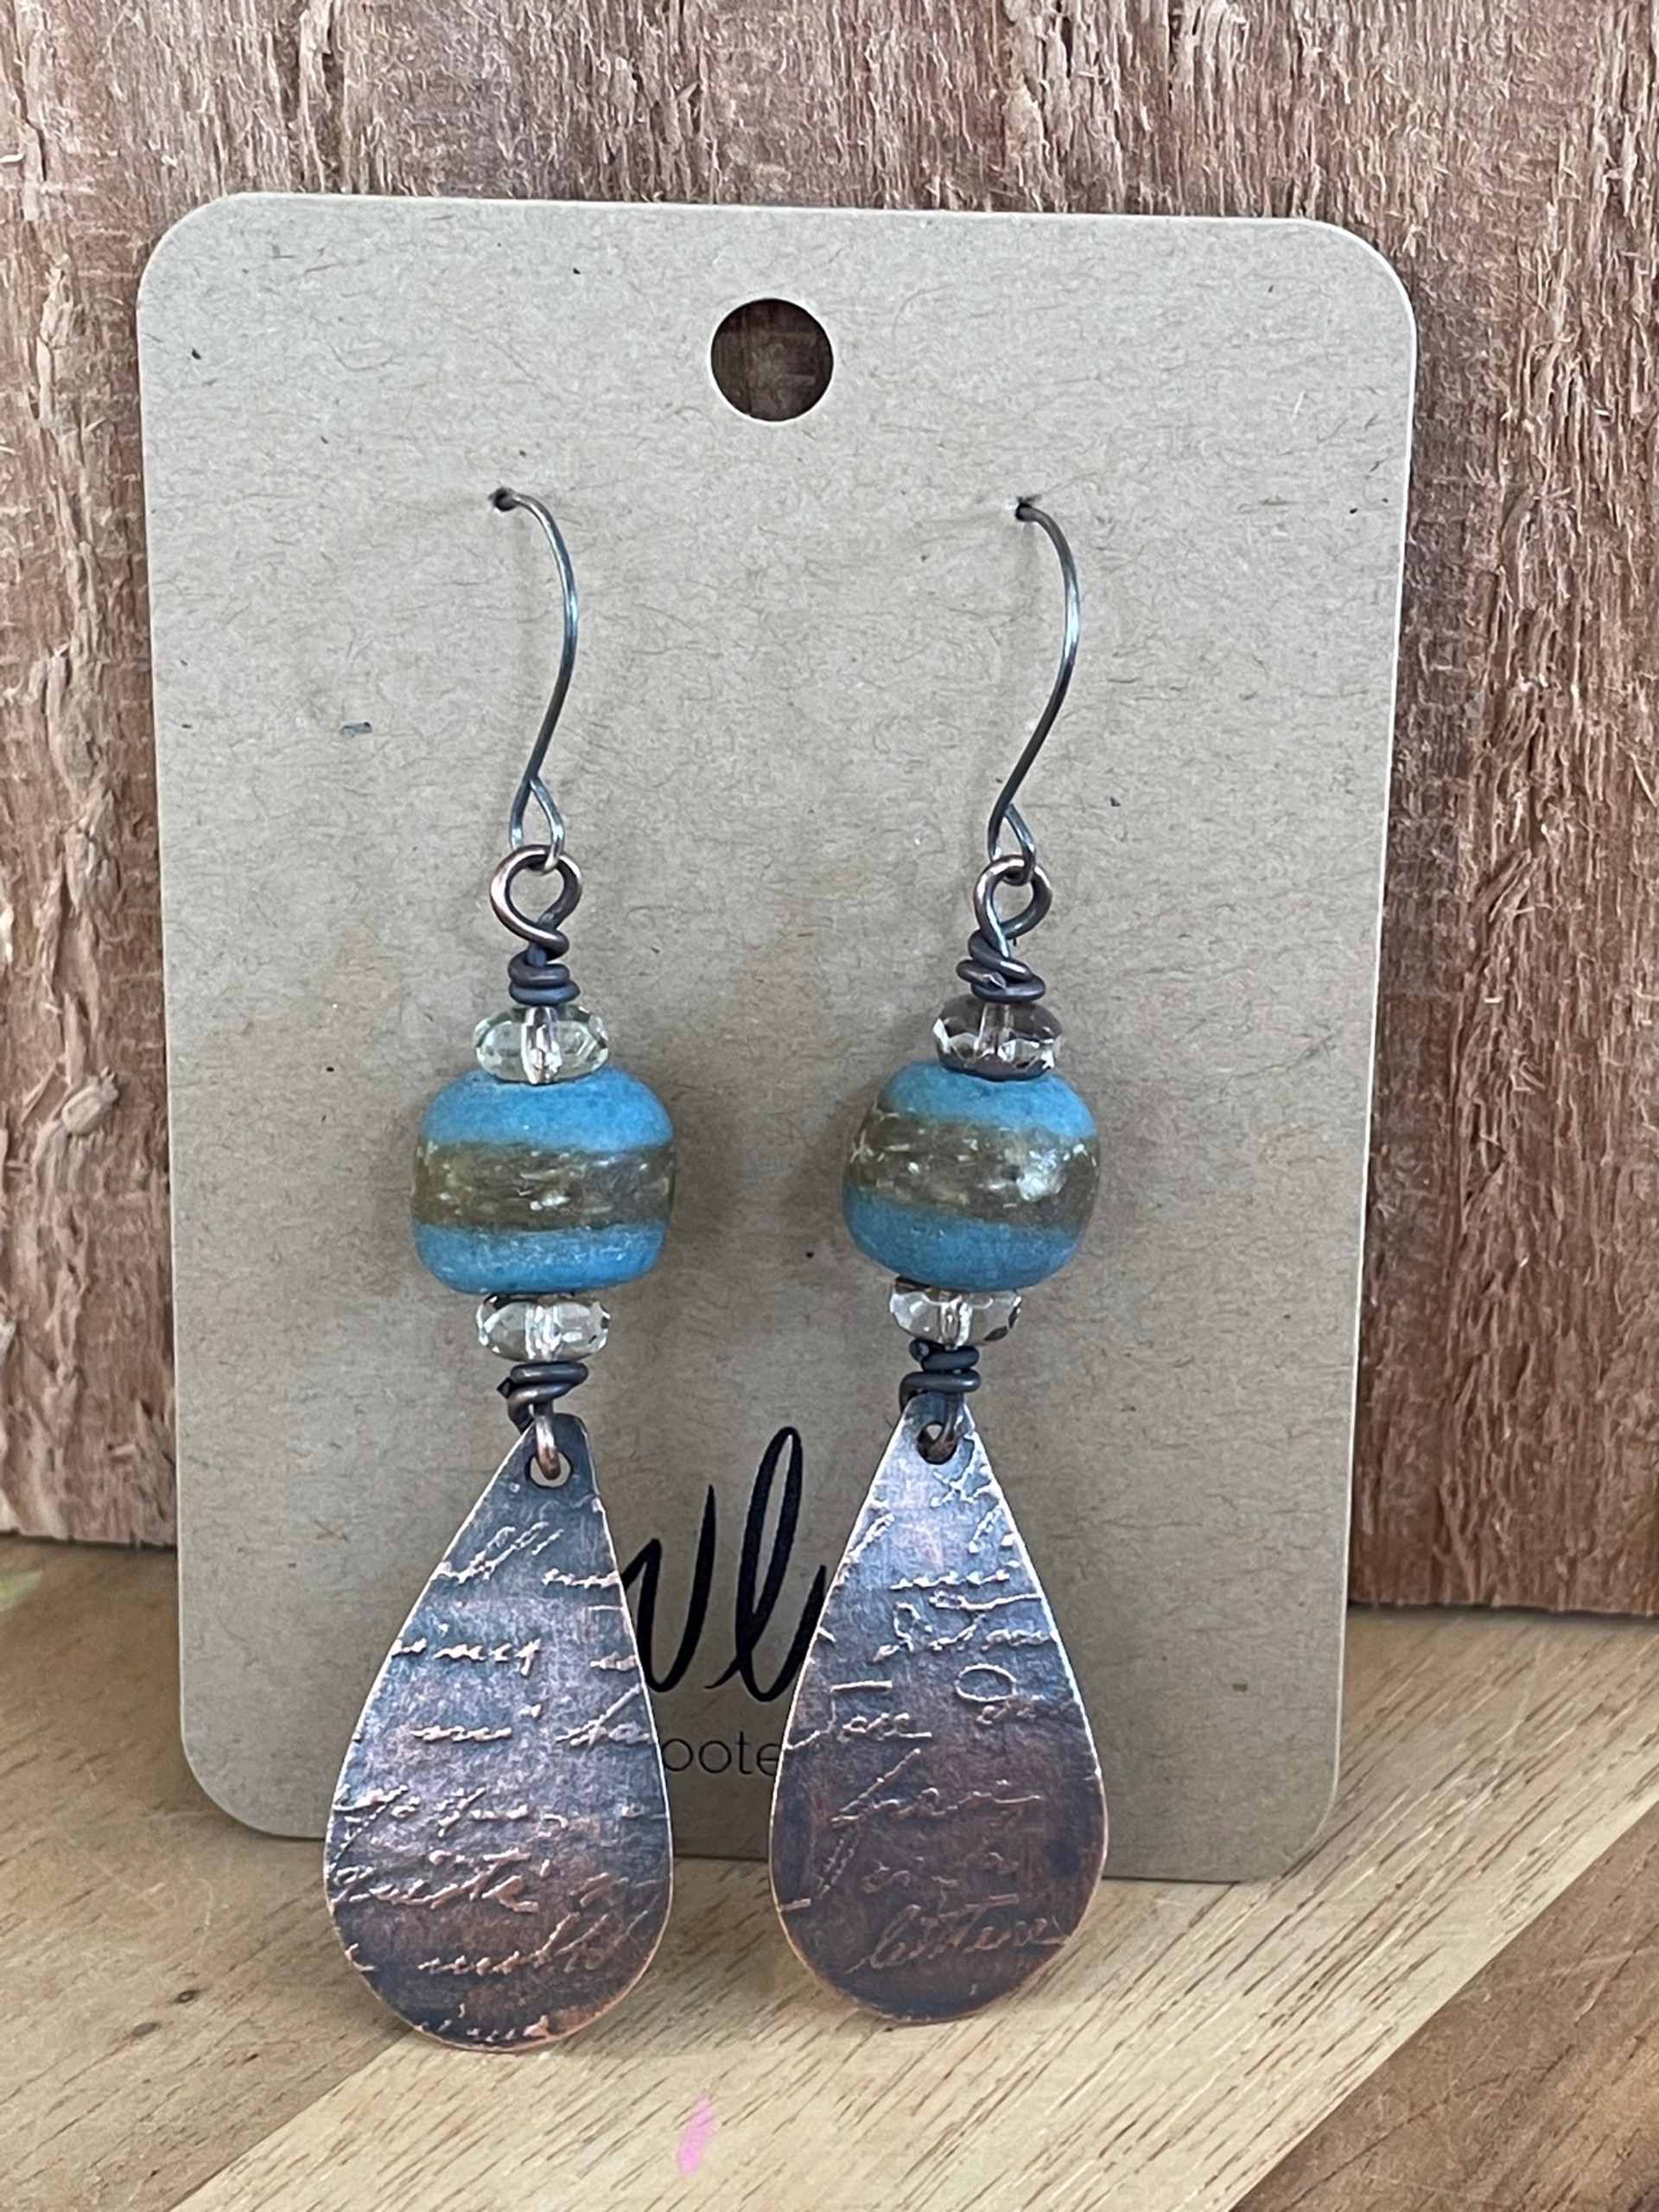 100-20 Copper with Beads Earrings by Vickie Wooten